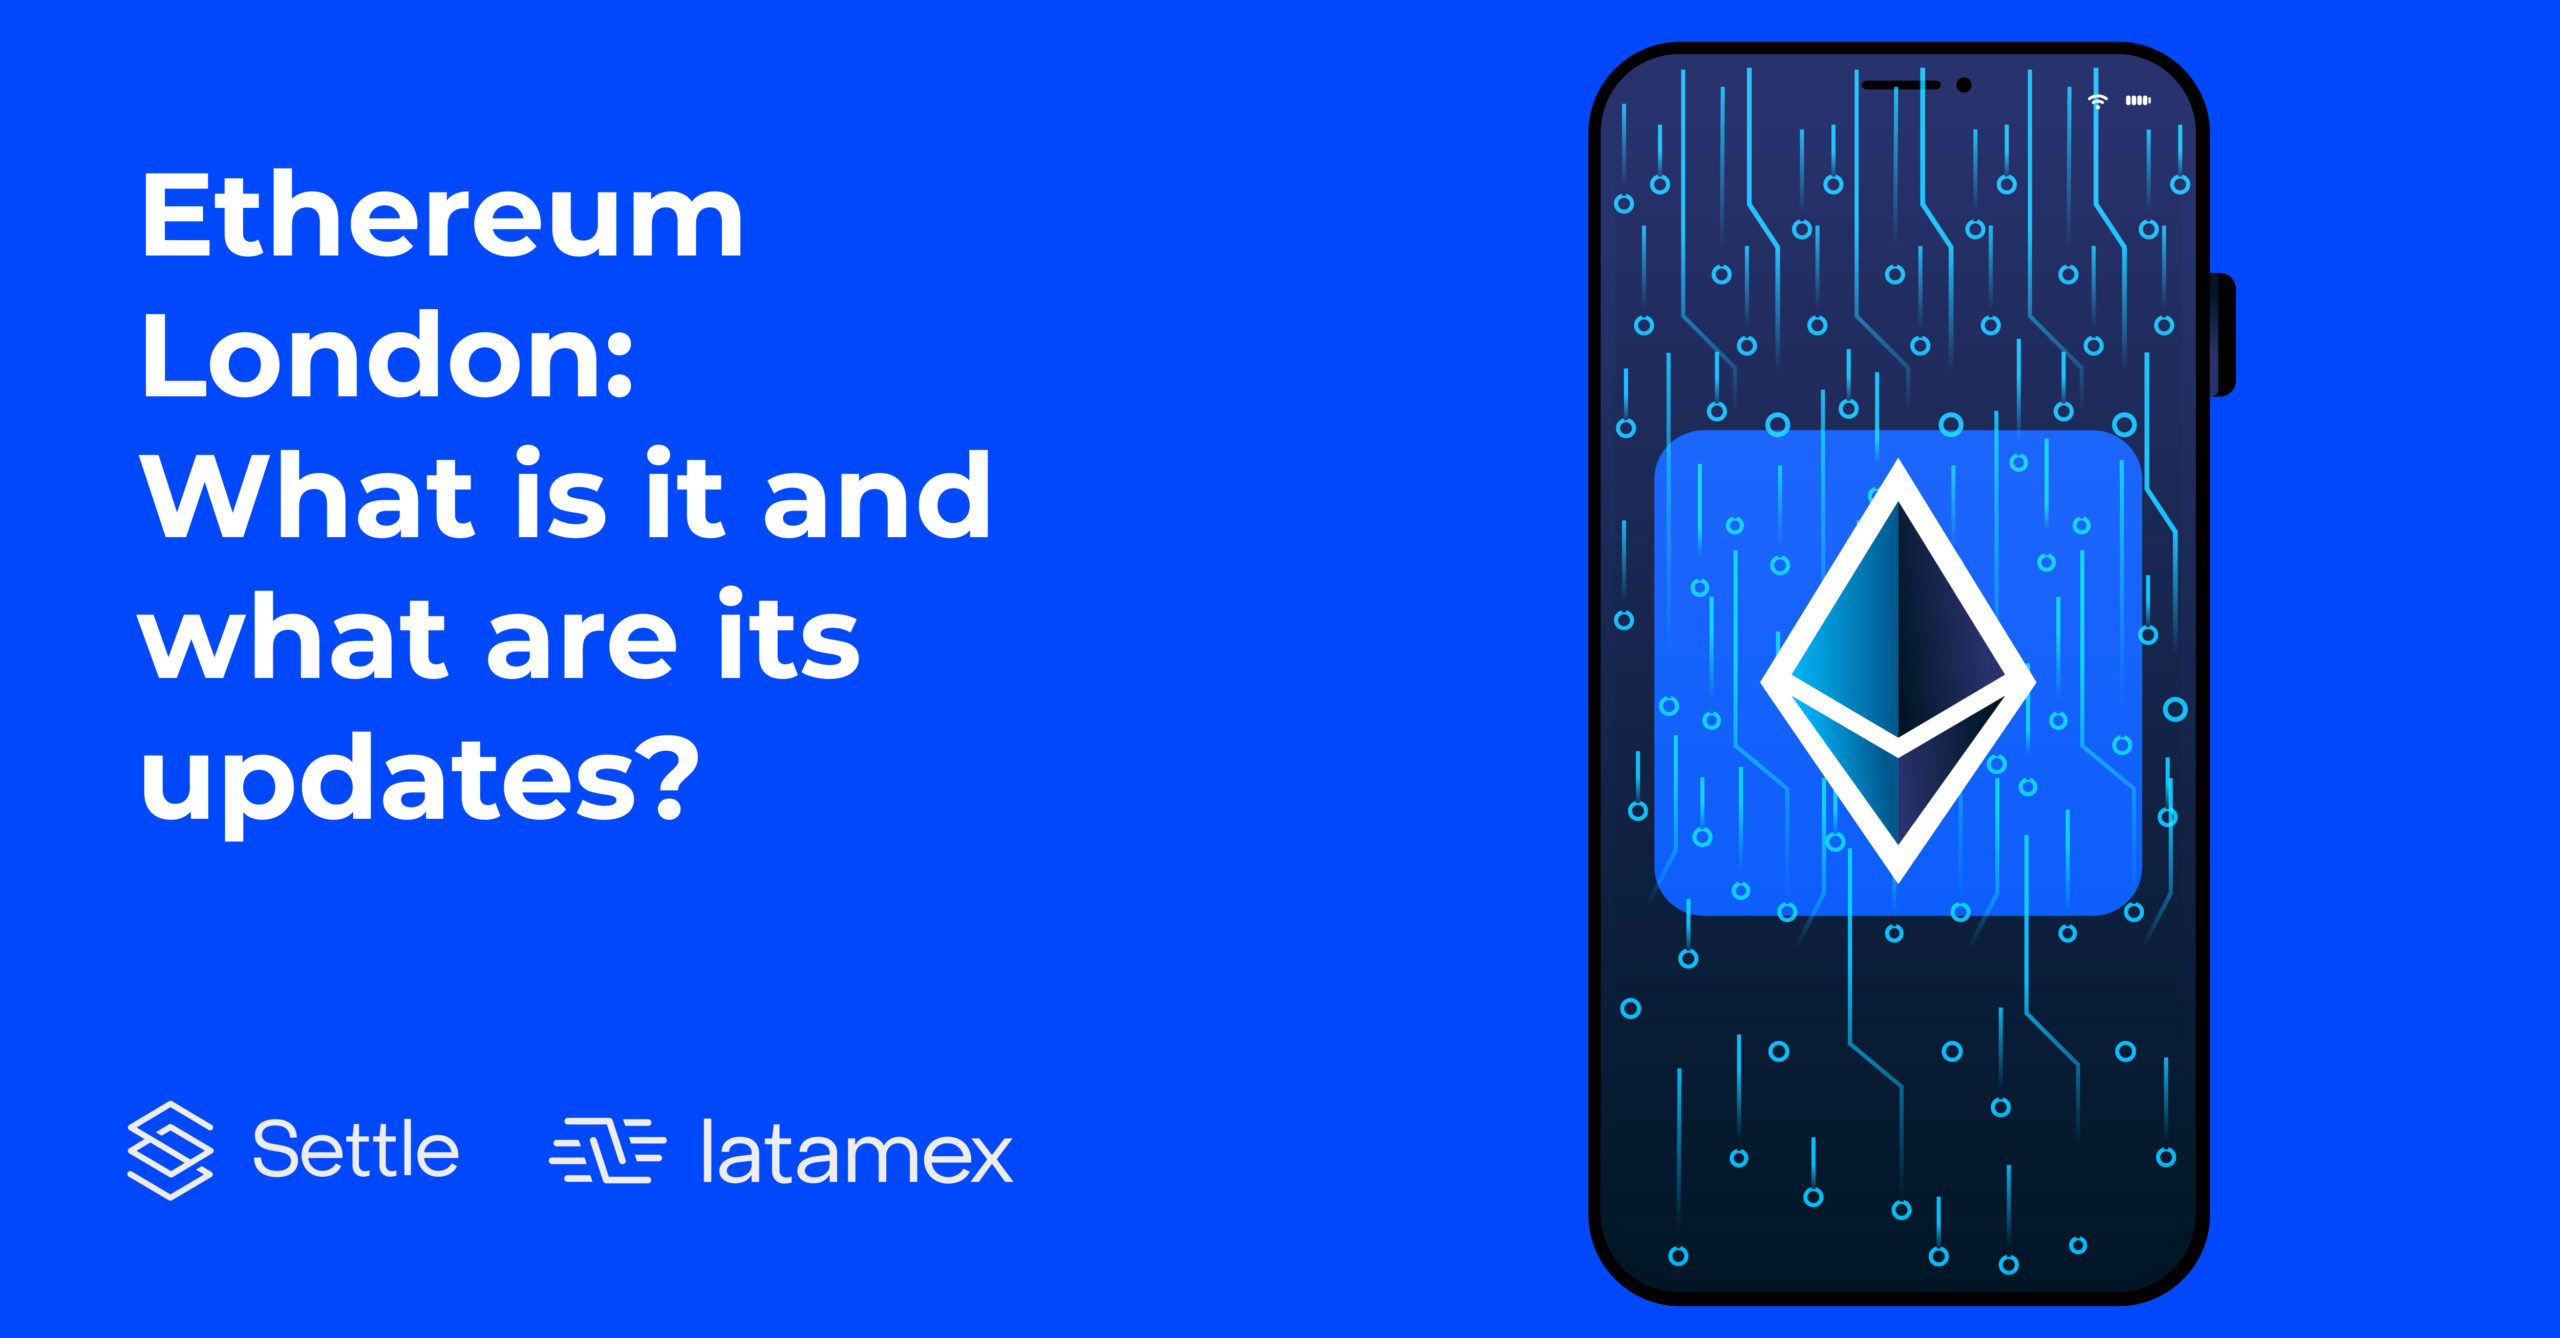 Ethereum London: What is it?